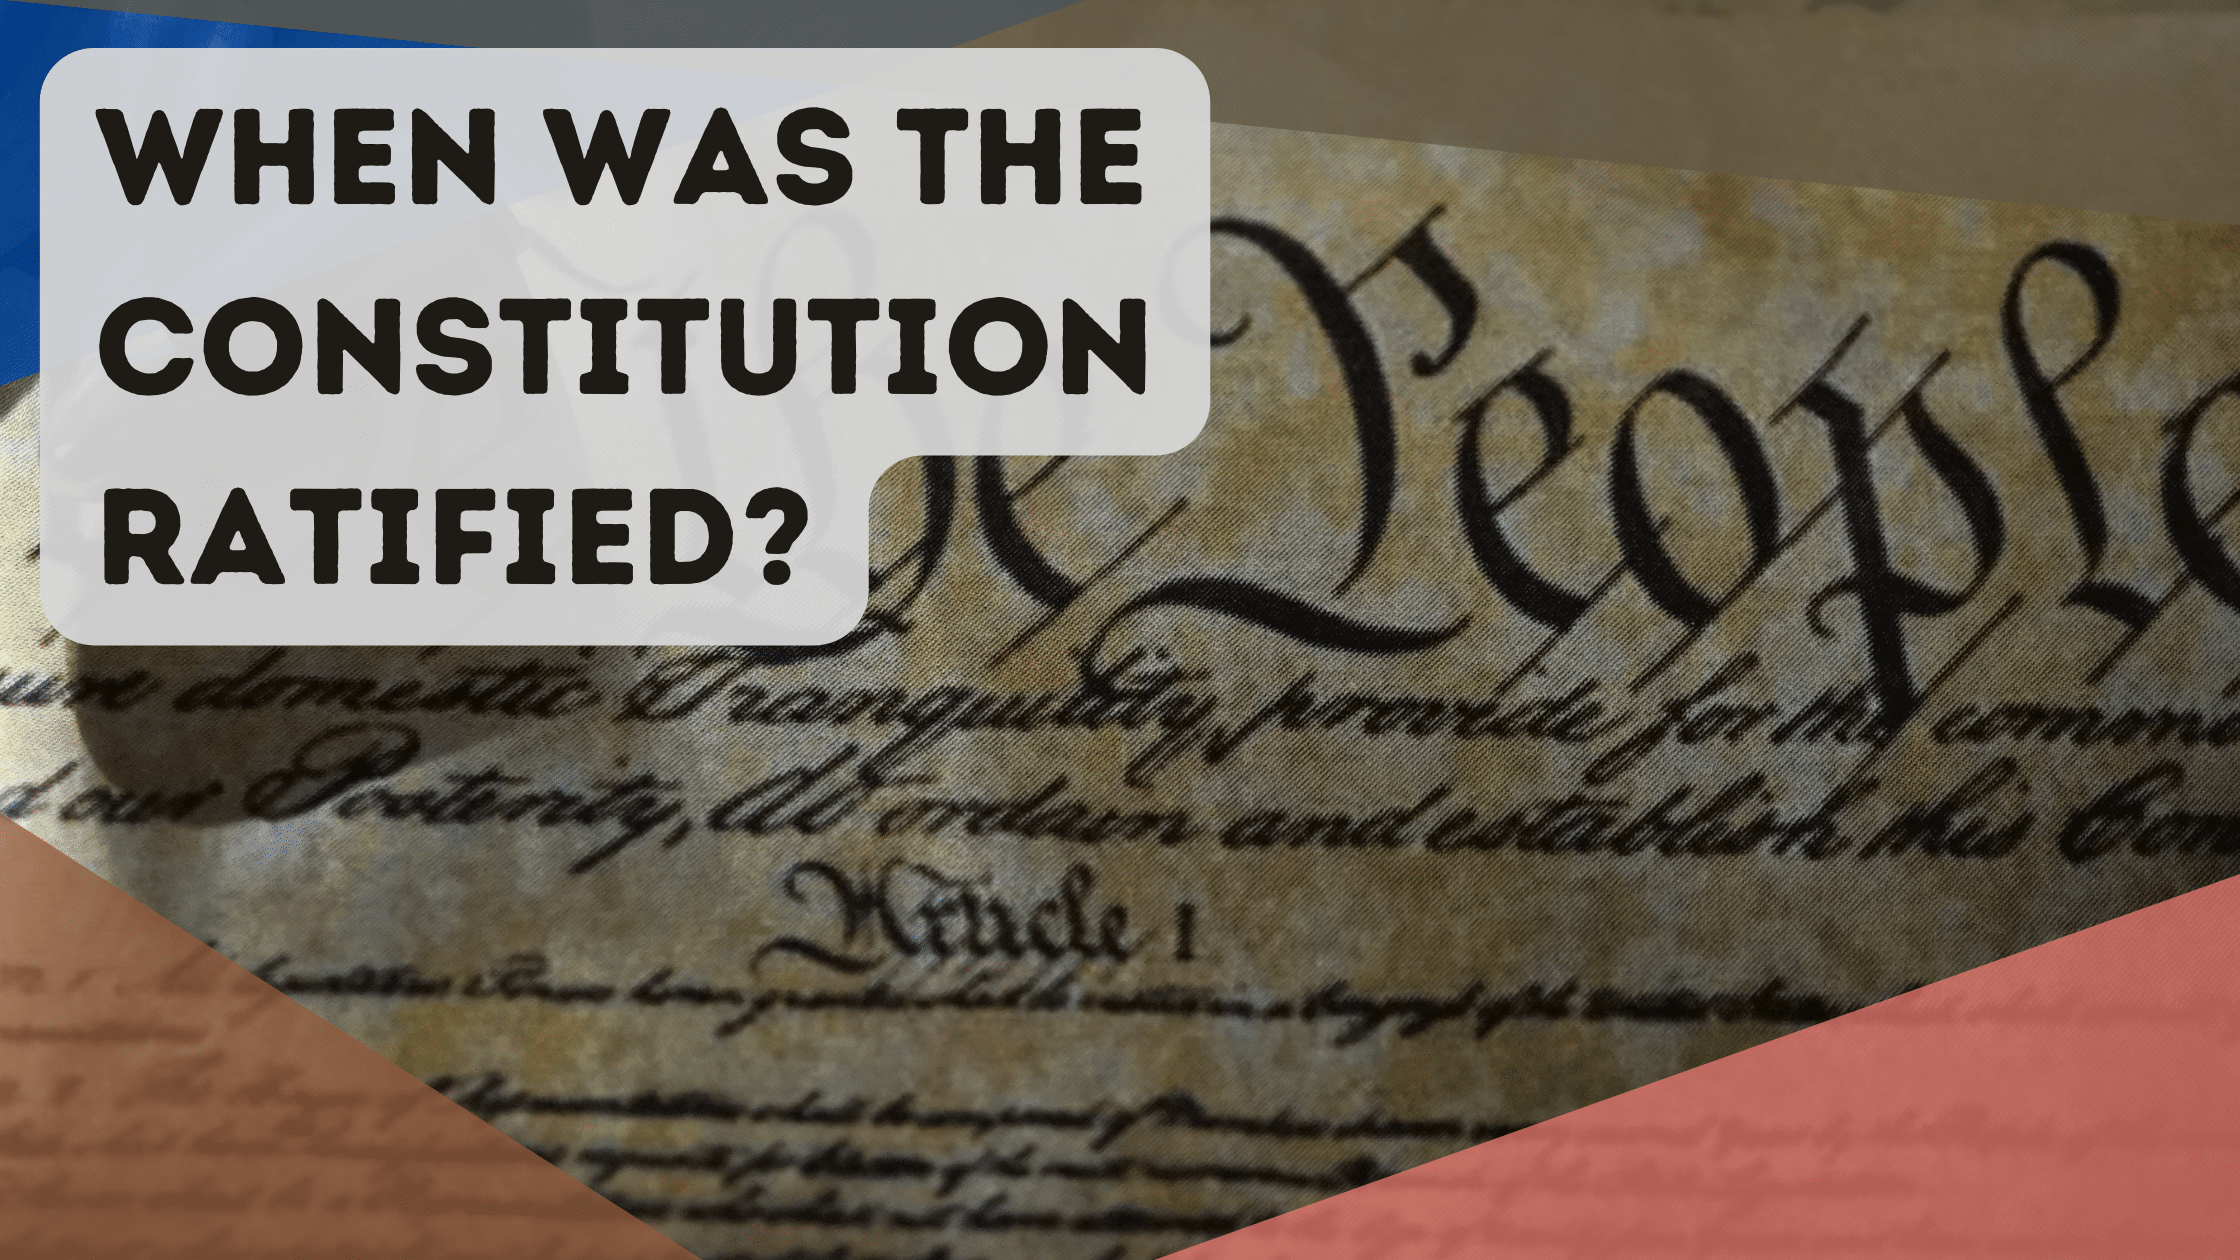 Constitution, ratified